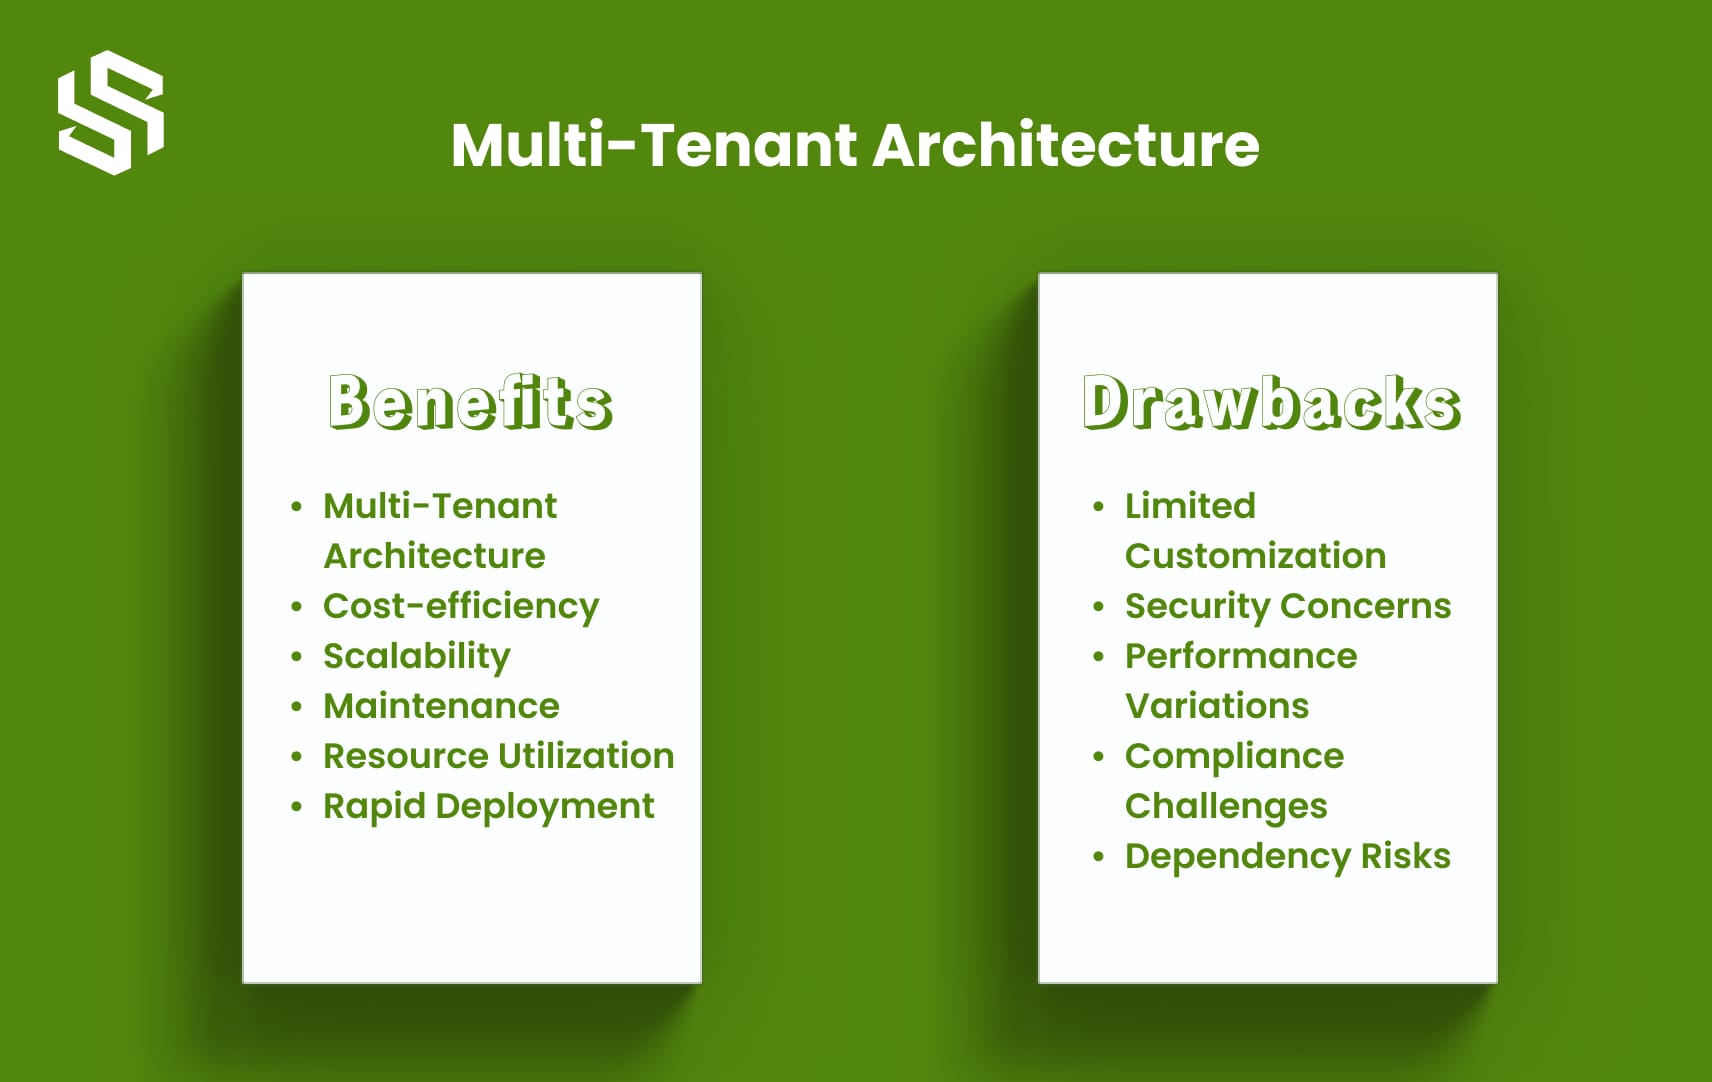 Benefits and Drawbacks of Multi-Tenant Architecture